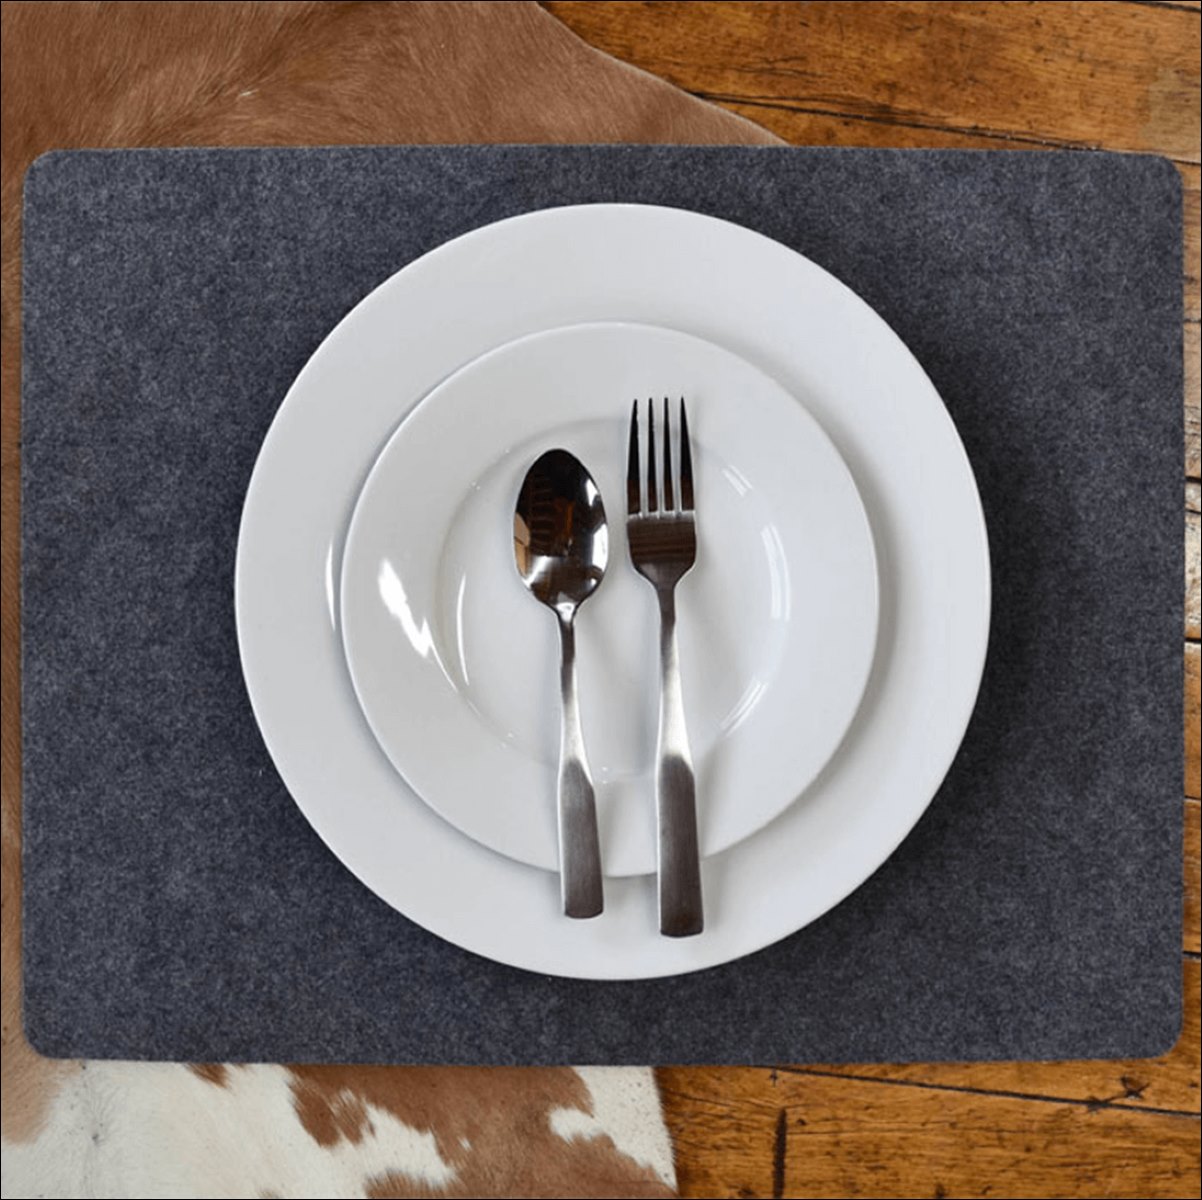 How To Clean Felt Placemats